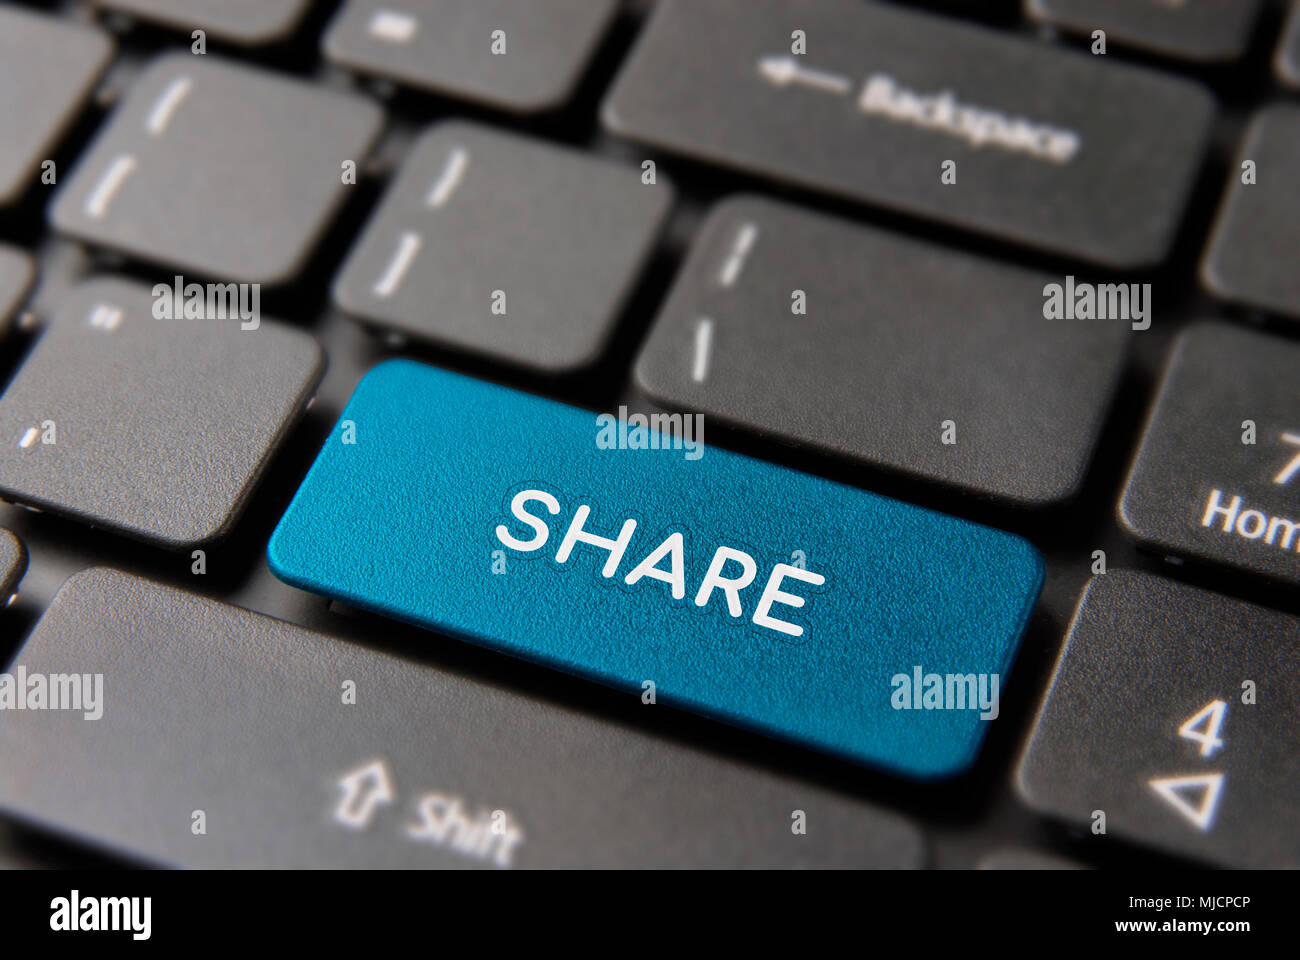 Share online content keyboard button for social media sharing concept. Network key closeup in blue color. Stock Photo